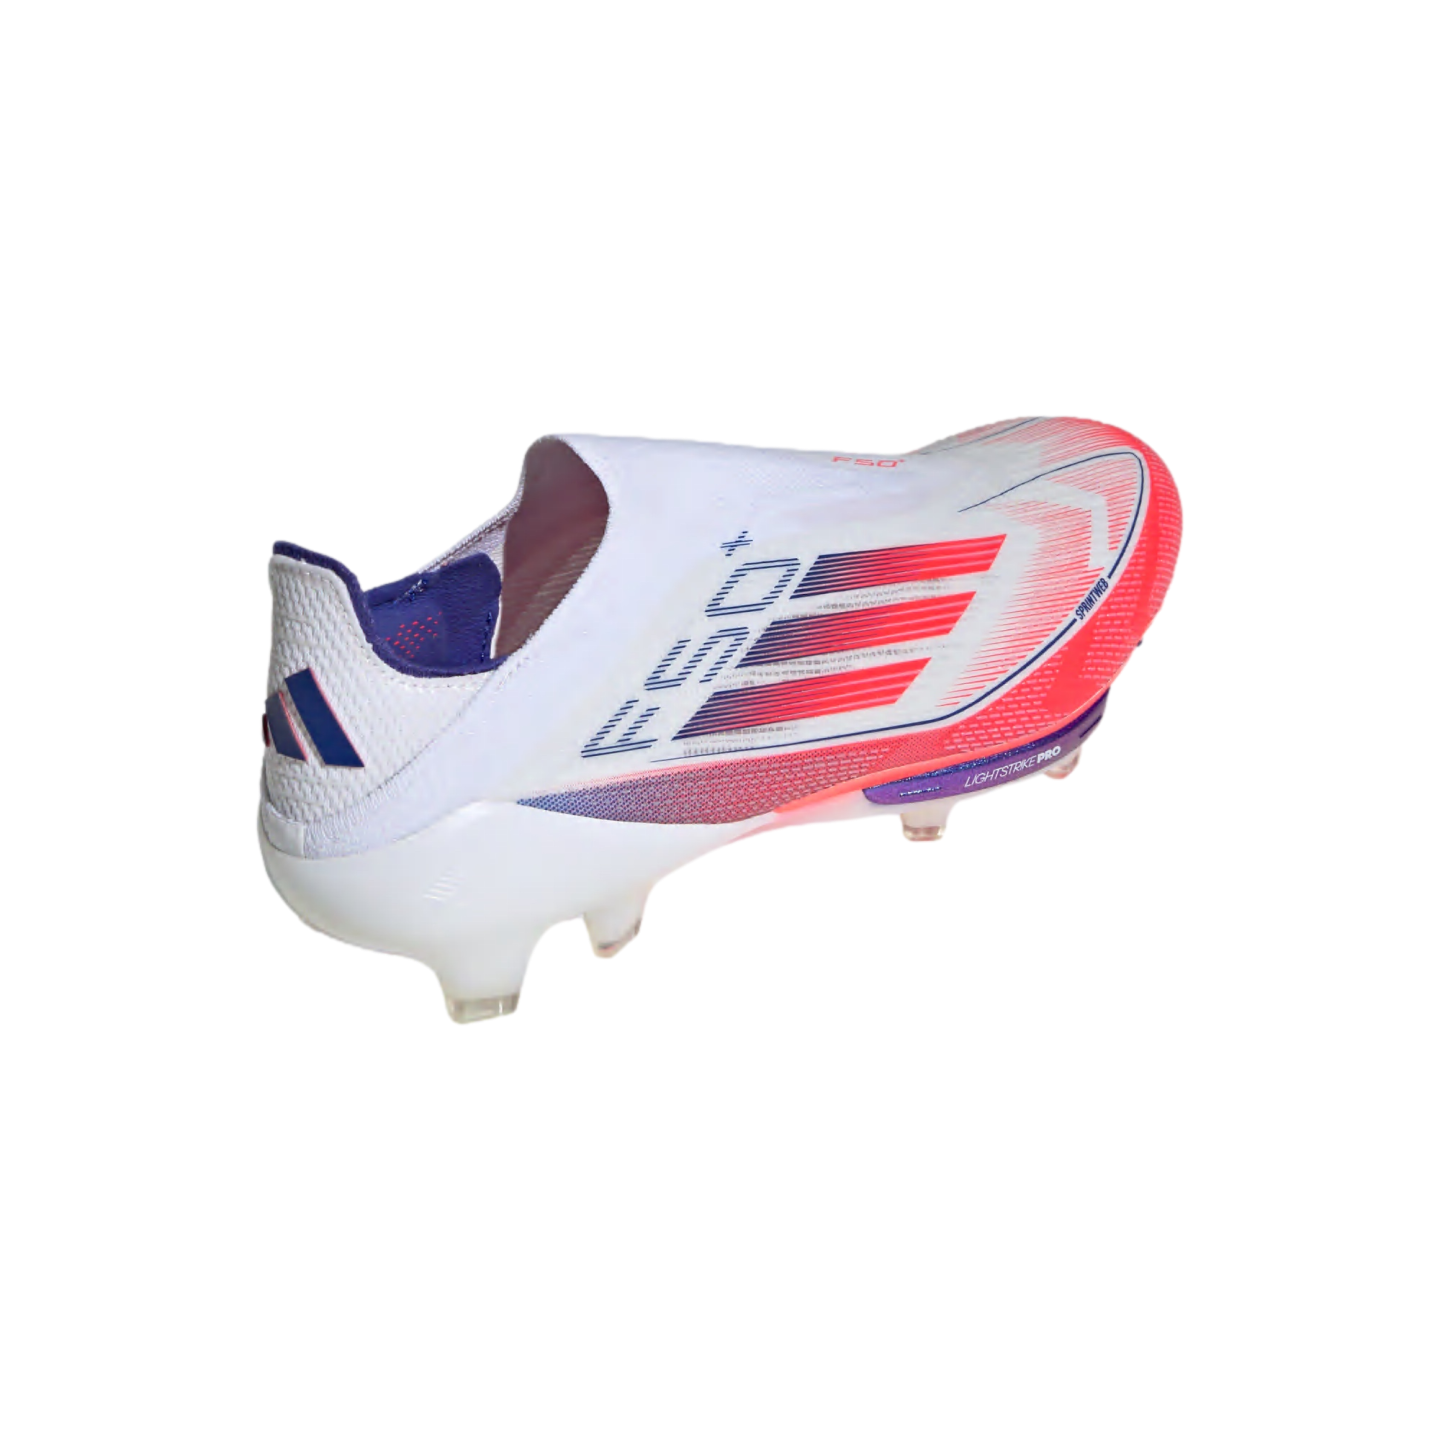 Adidas F50+ Firm Ground Cleats